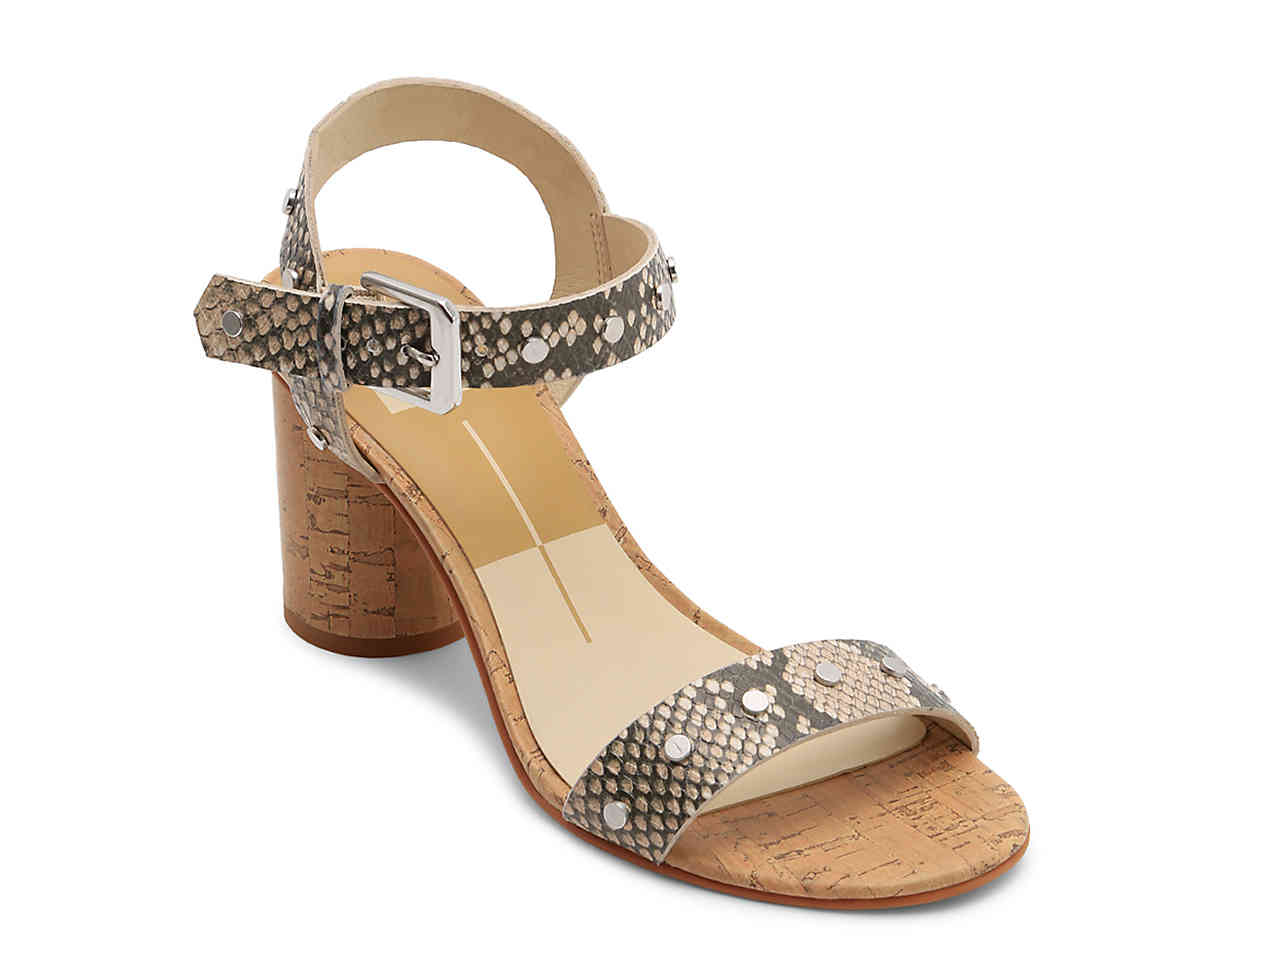 These Fierce $80 Snake-Print Heels Are My New Go-To | Essence